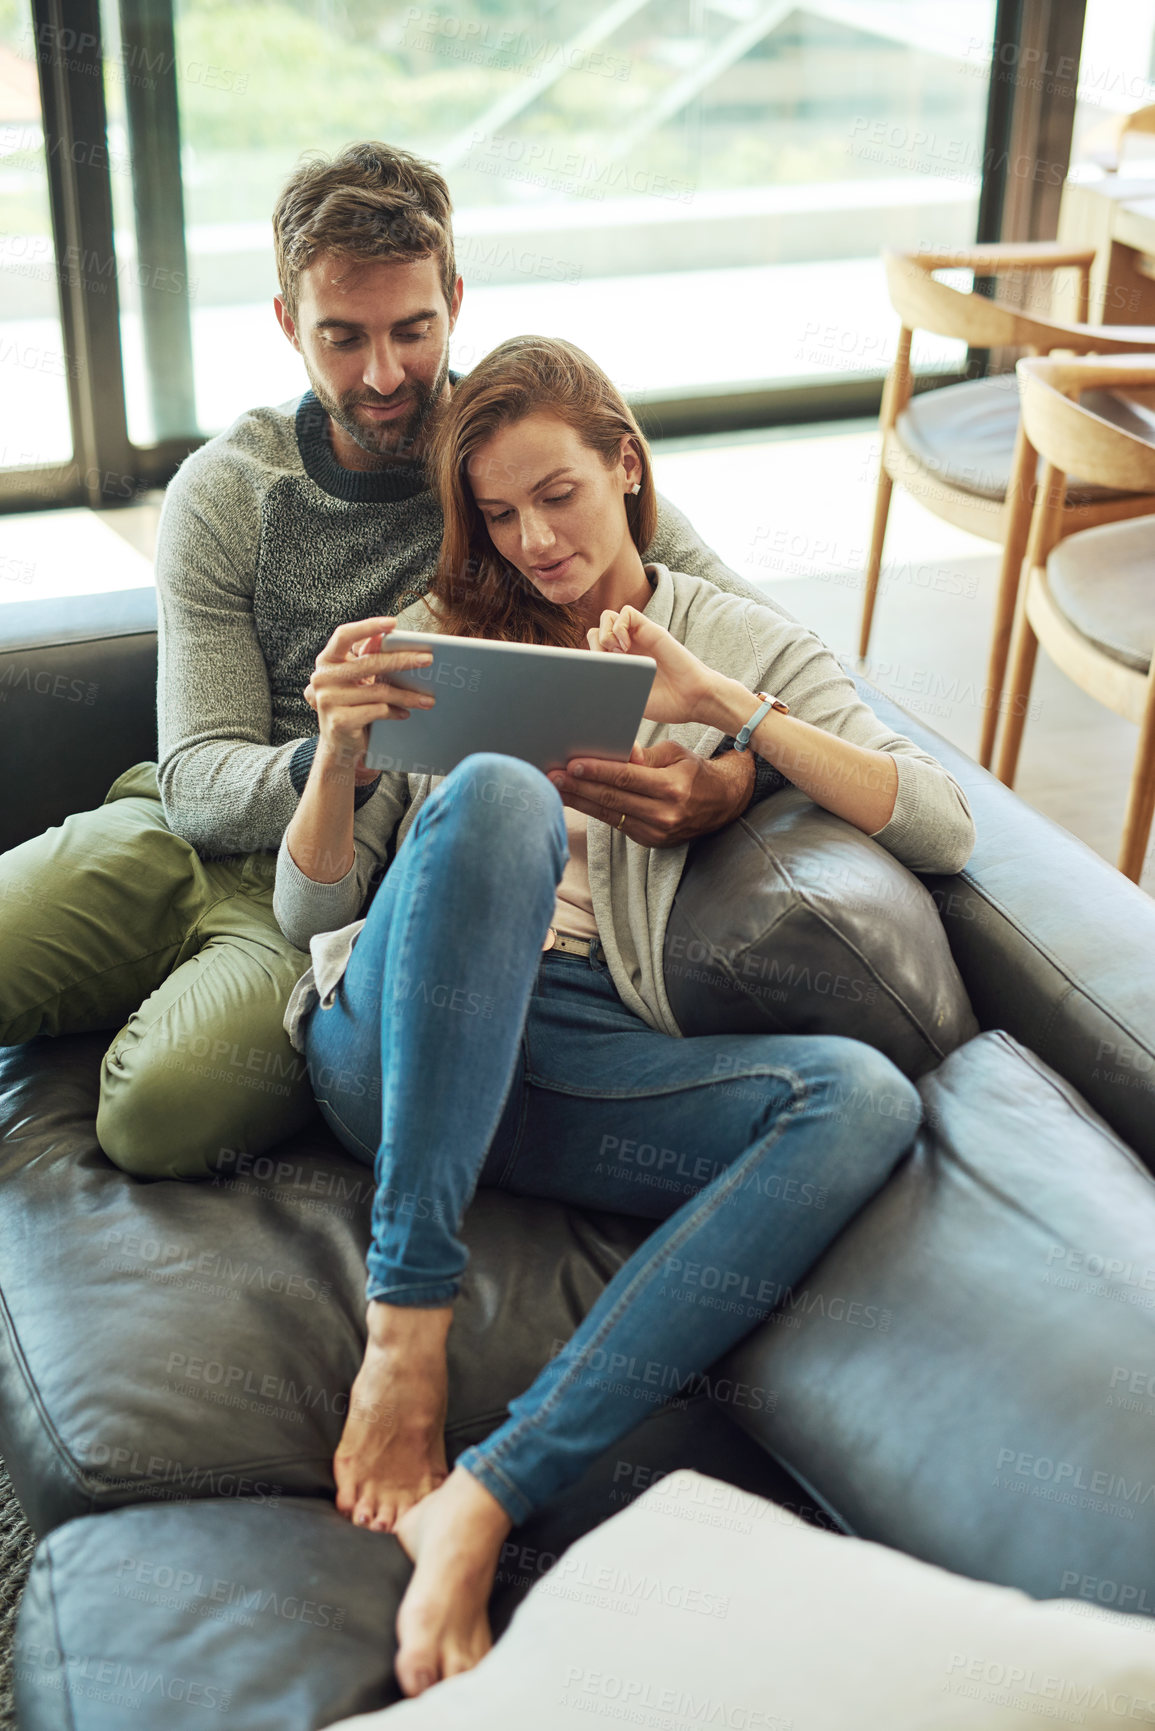 Buy stock photo High angle shot of an affectionate young couple using a tablet while relaxing on their sofa at home